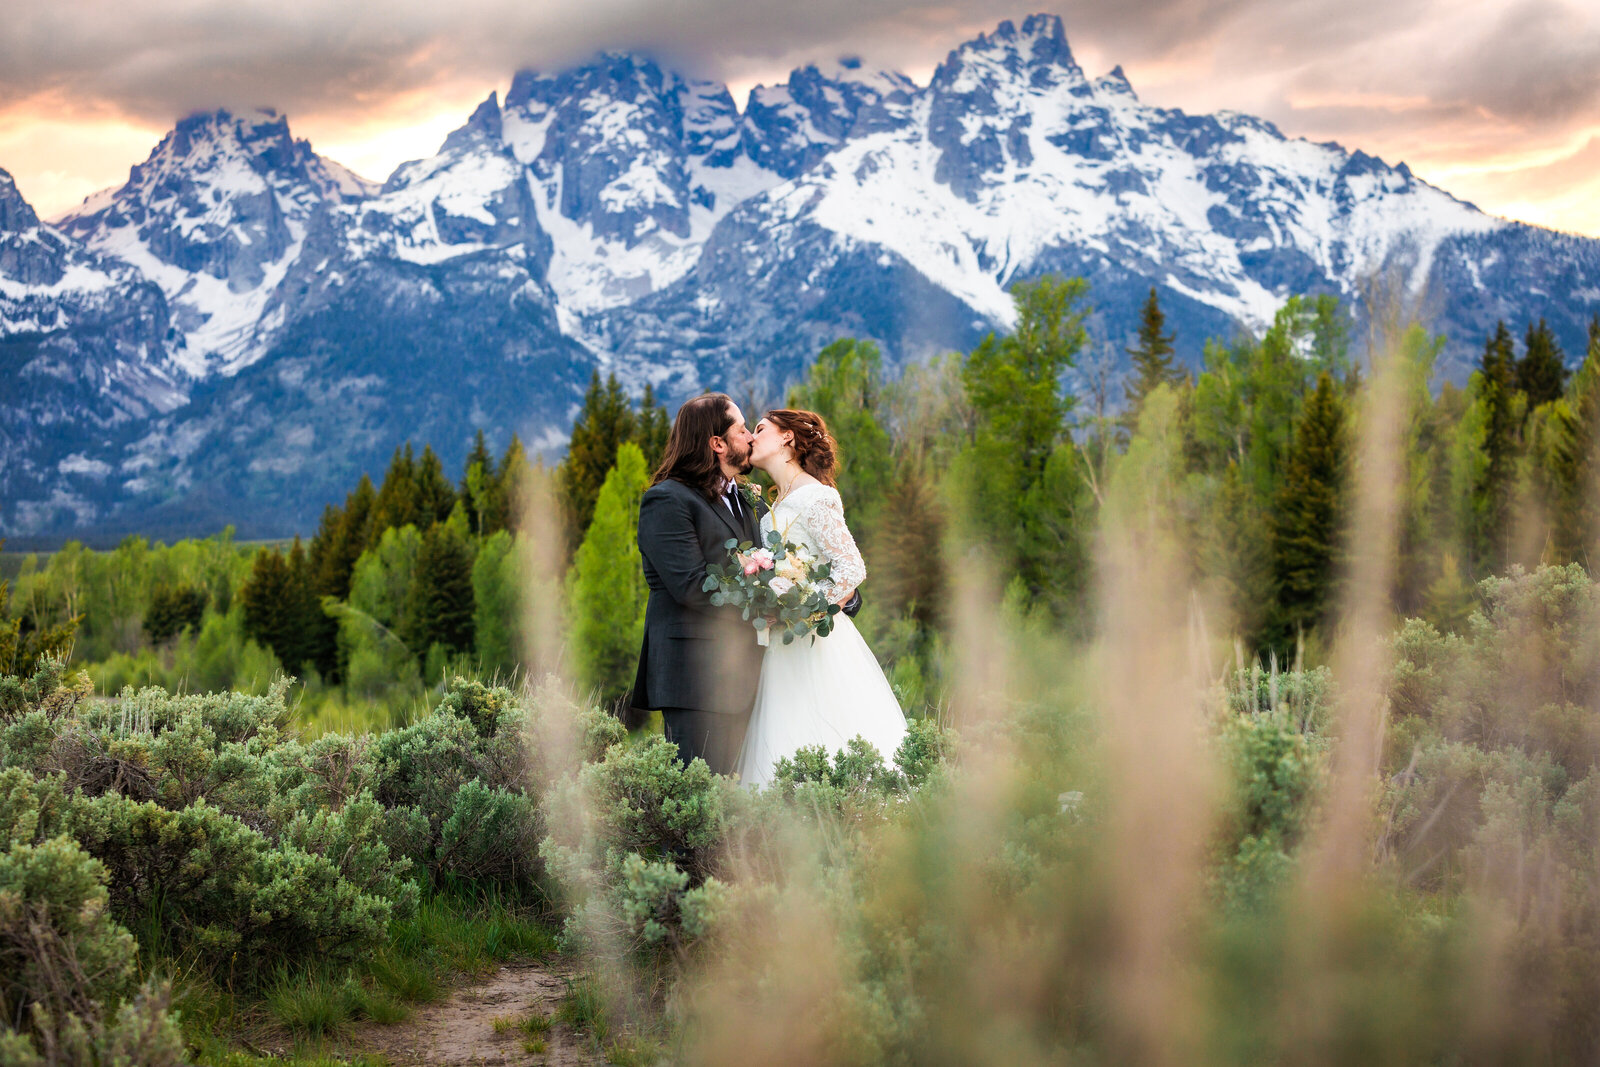 Bride and groom kiss behind sagebrush at their jackson hole wedding at schwbachers landing. The mountains are deep blue and the sky is peach and orange. Perfect summer sunset wedding in Grand Teton National Park.